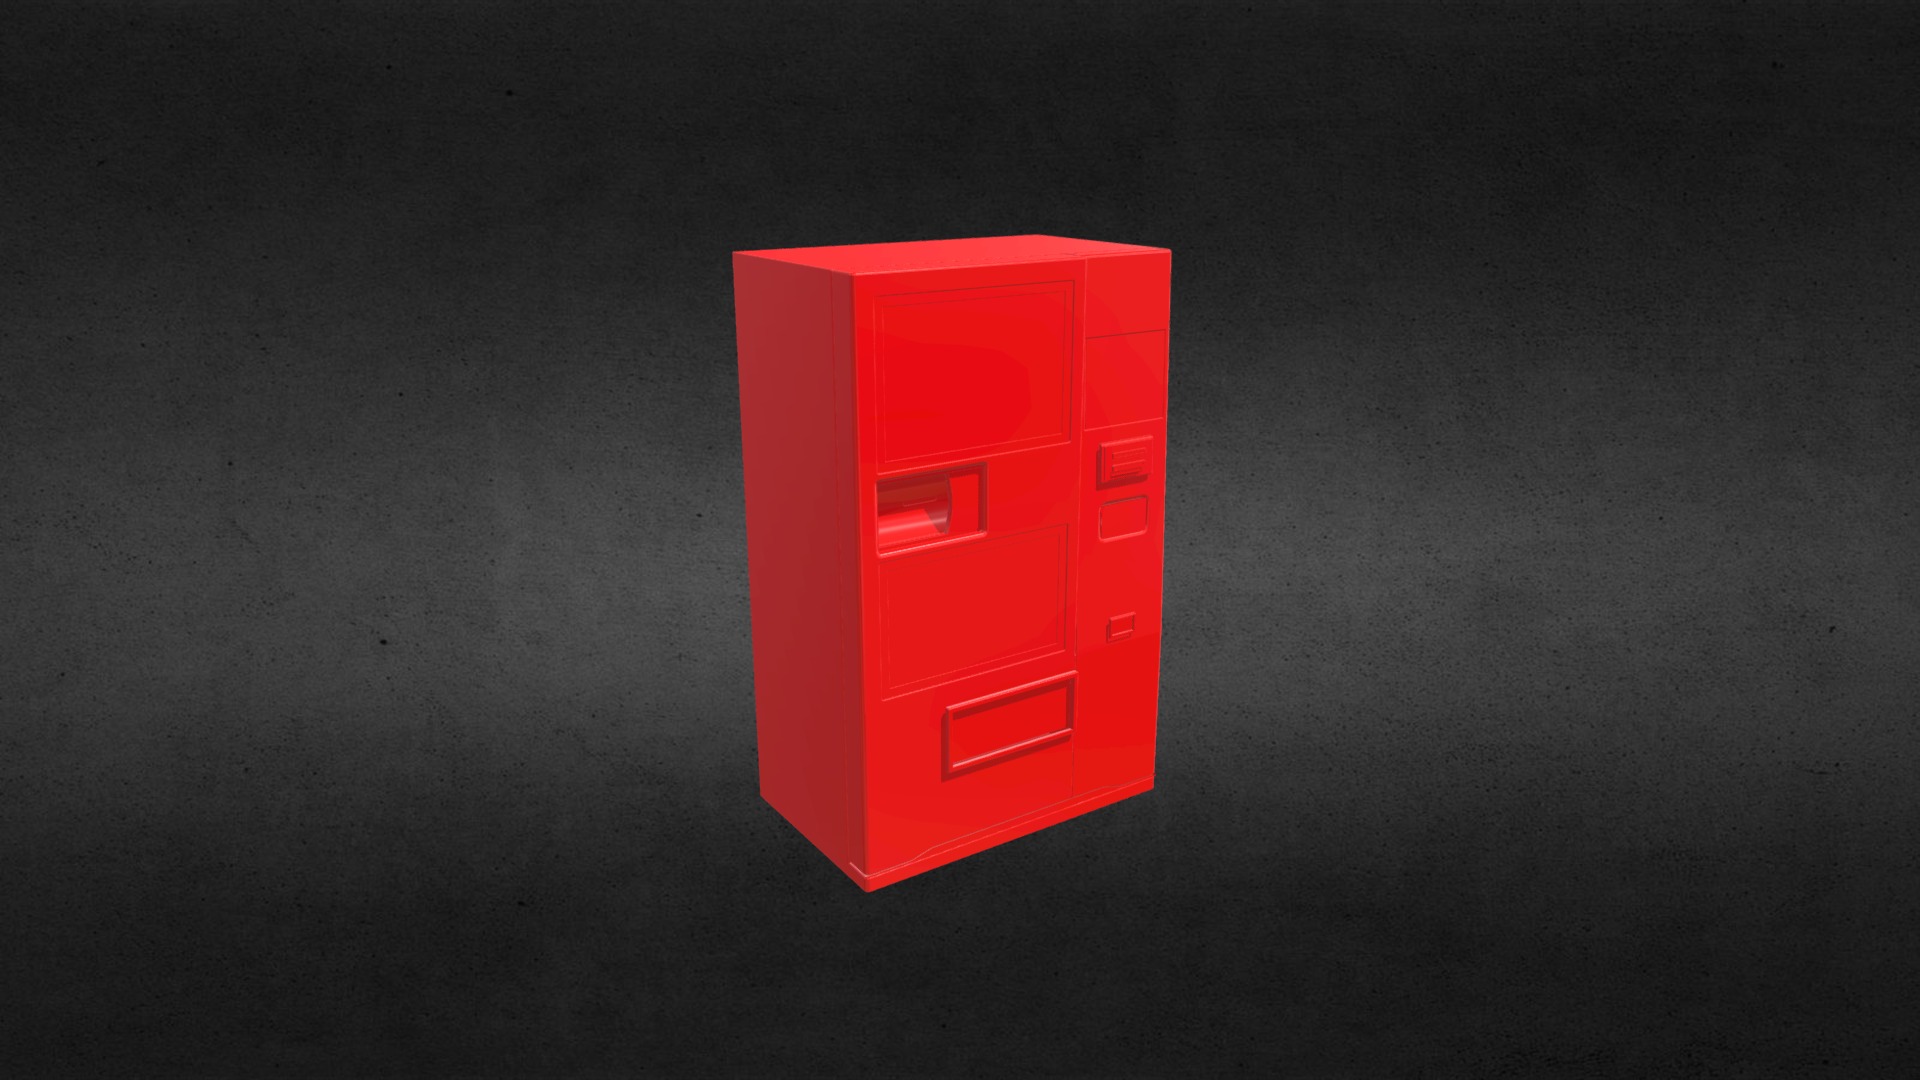 3D model self service vending machine - This is a 3D model of the self service vending machine. The 3D model is about a red square with a black background.